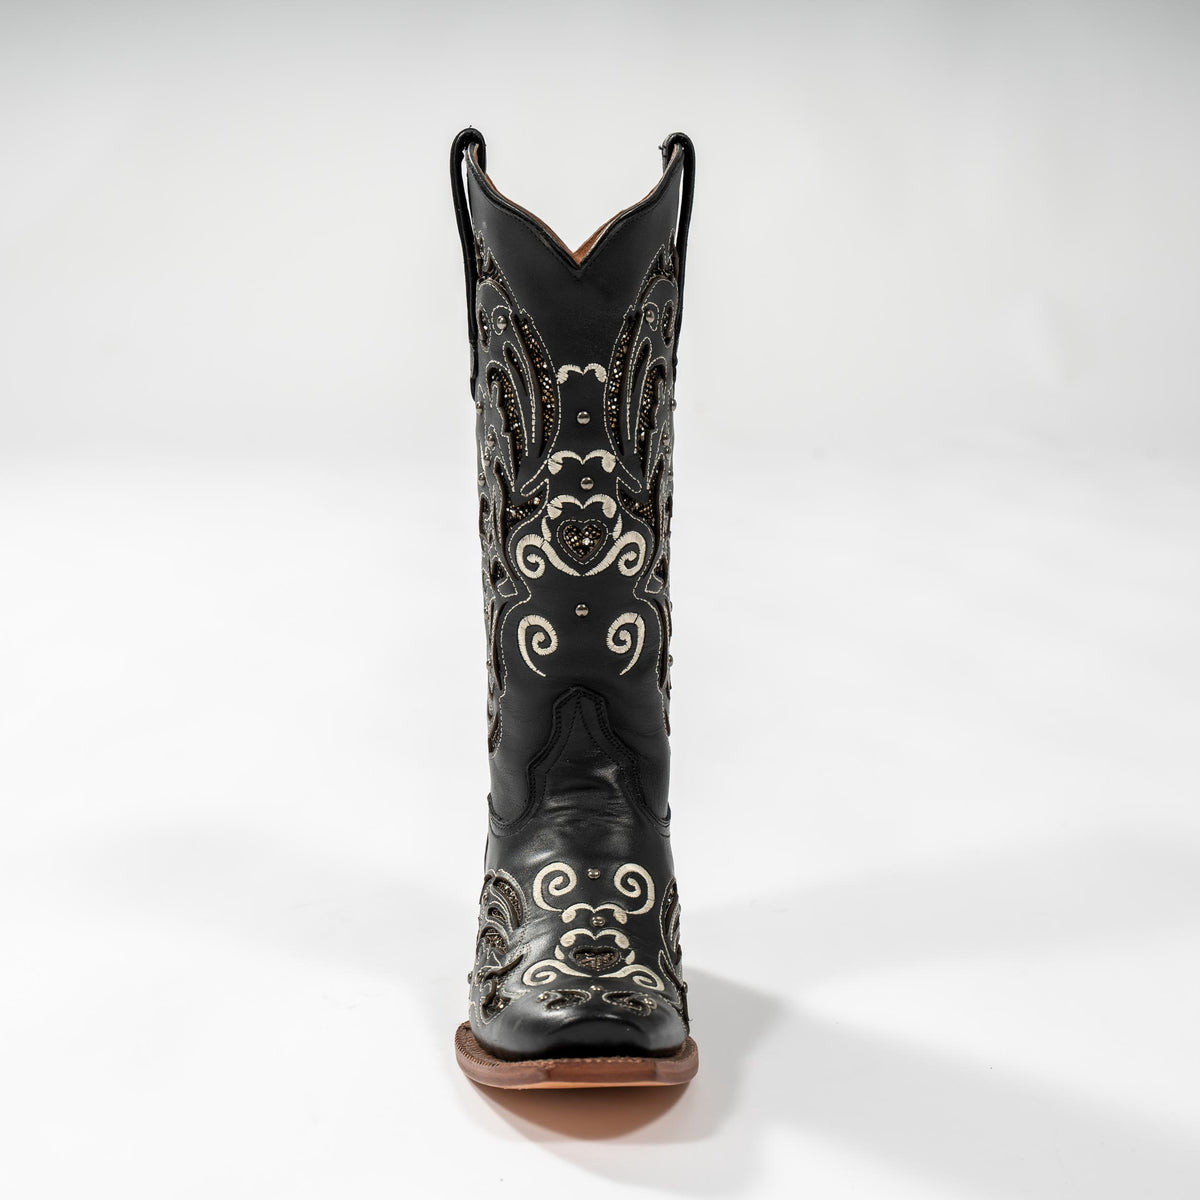 Tanner Mark Boot Venice Black, midnight black  with silver shimmer inlay front